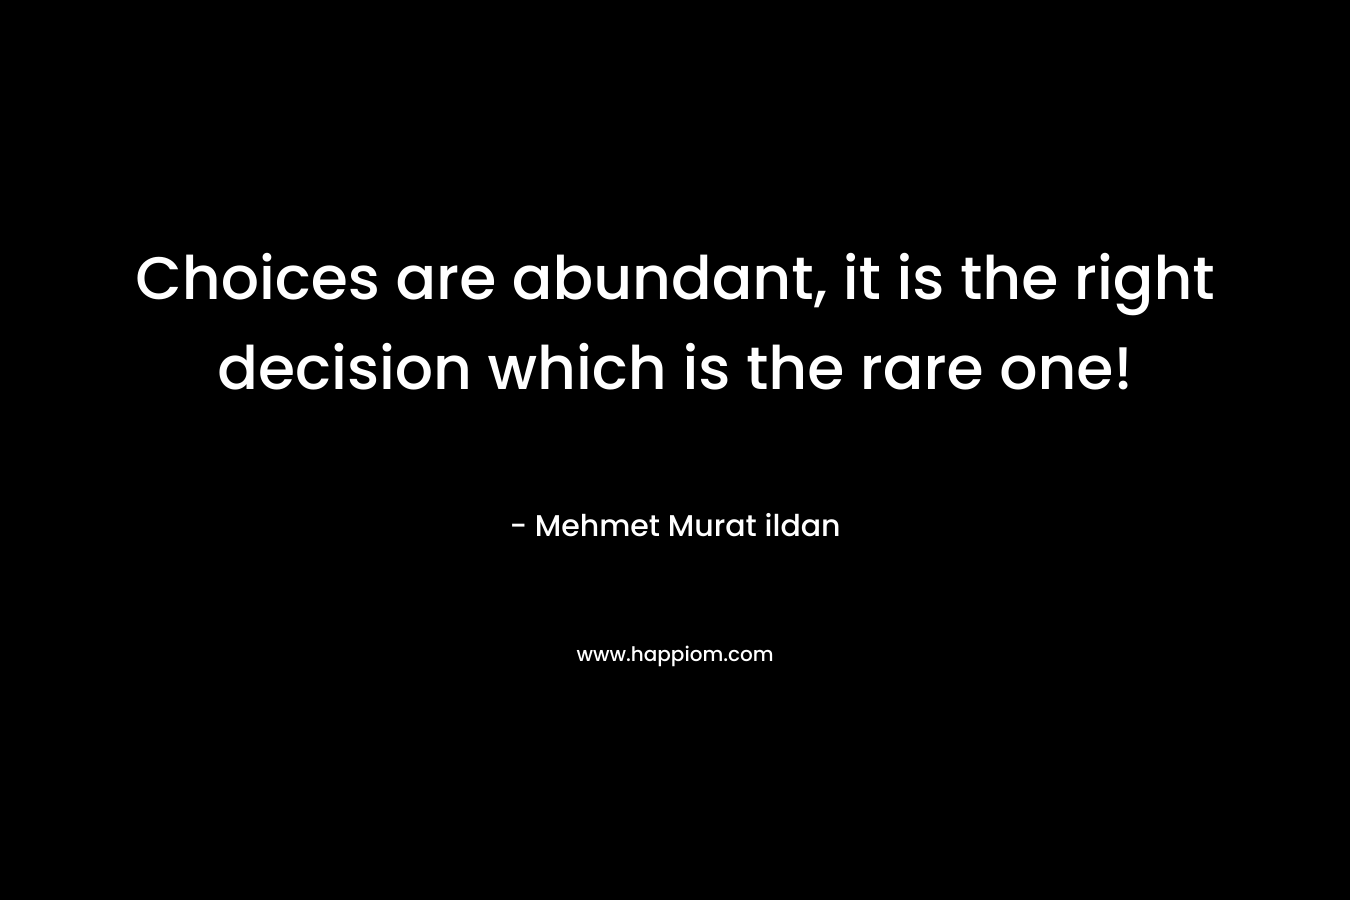 Choices are abundant, it is the right decision which is the rare one!